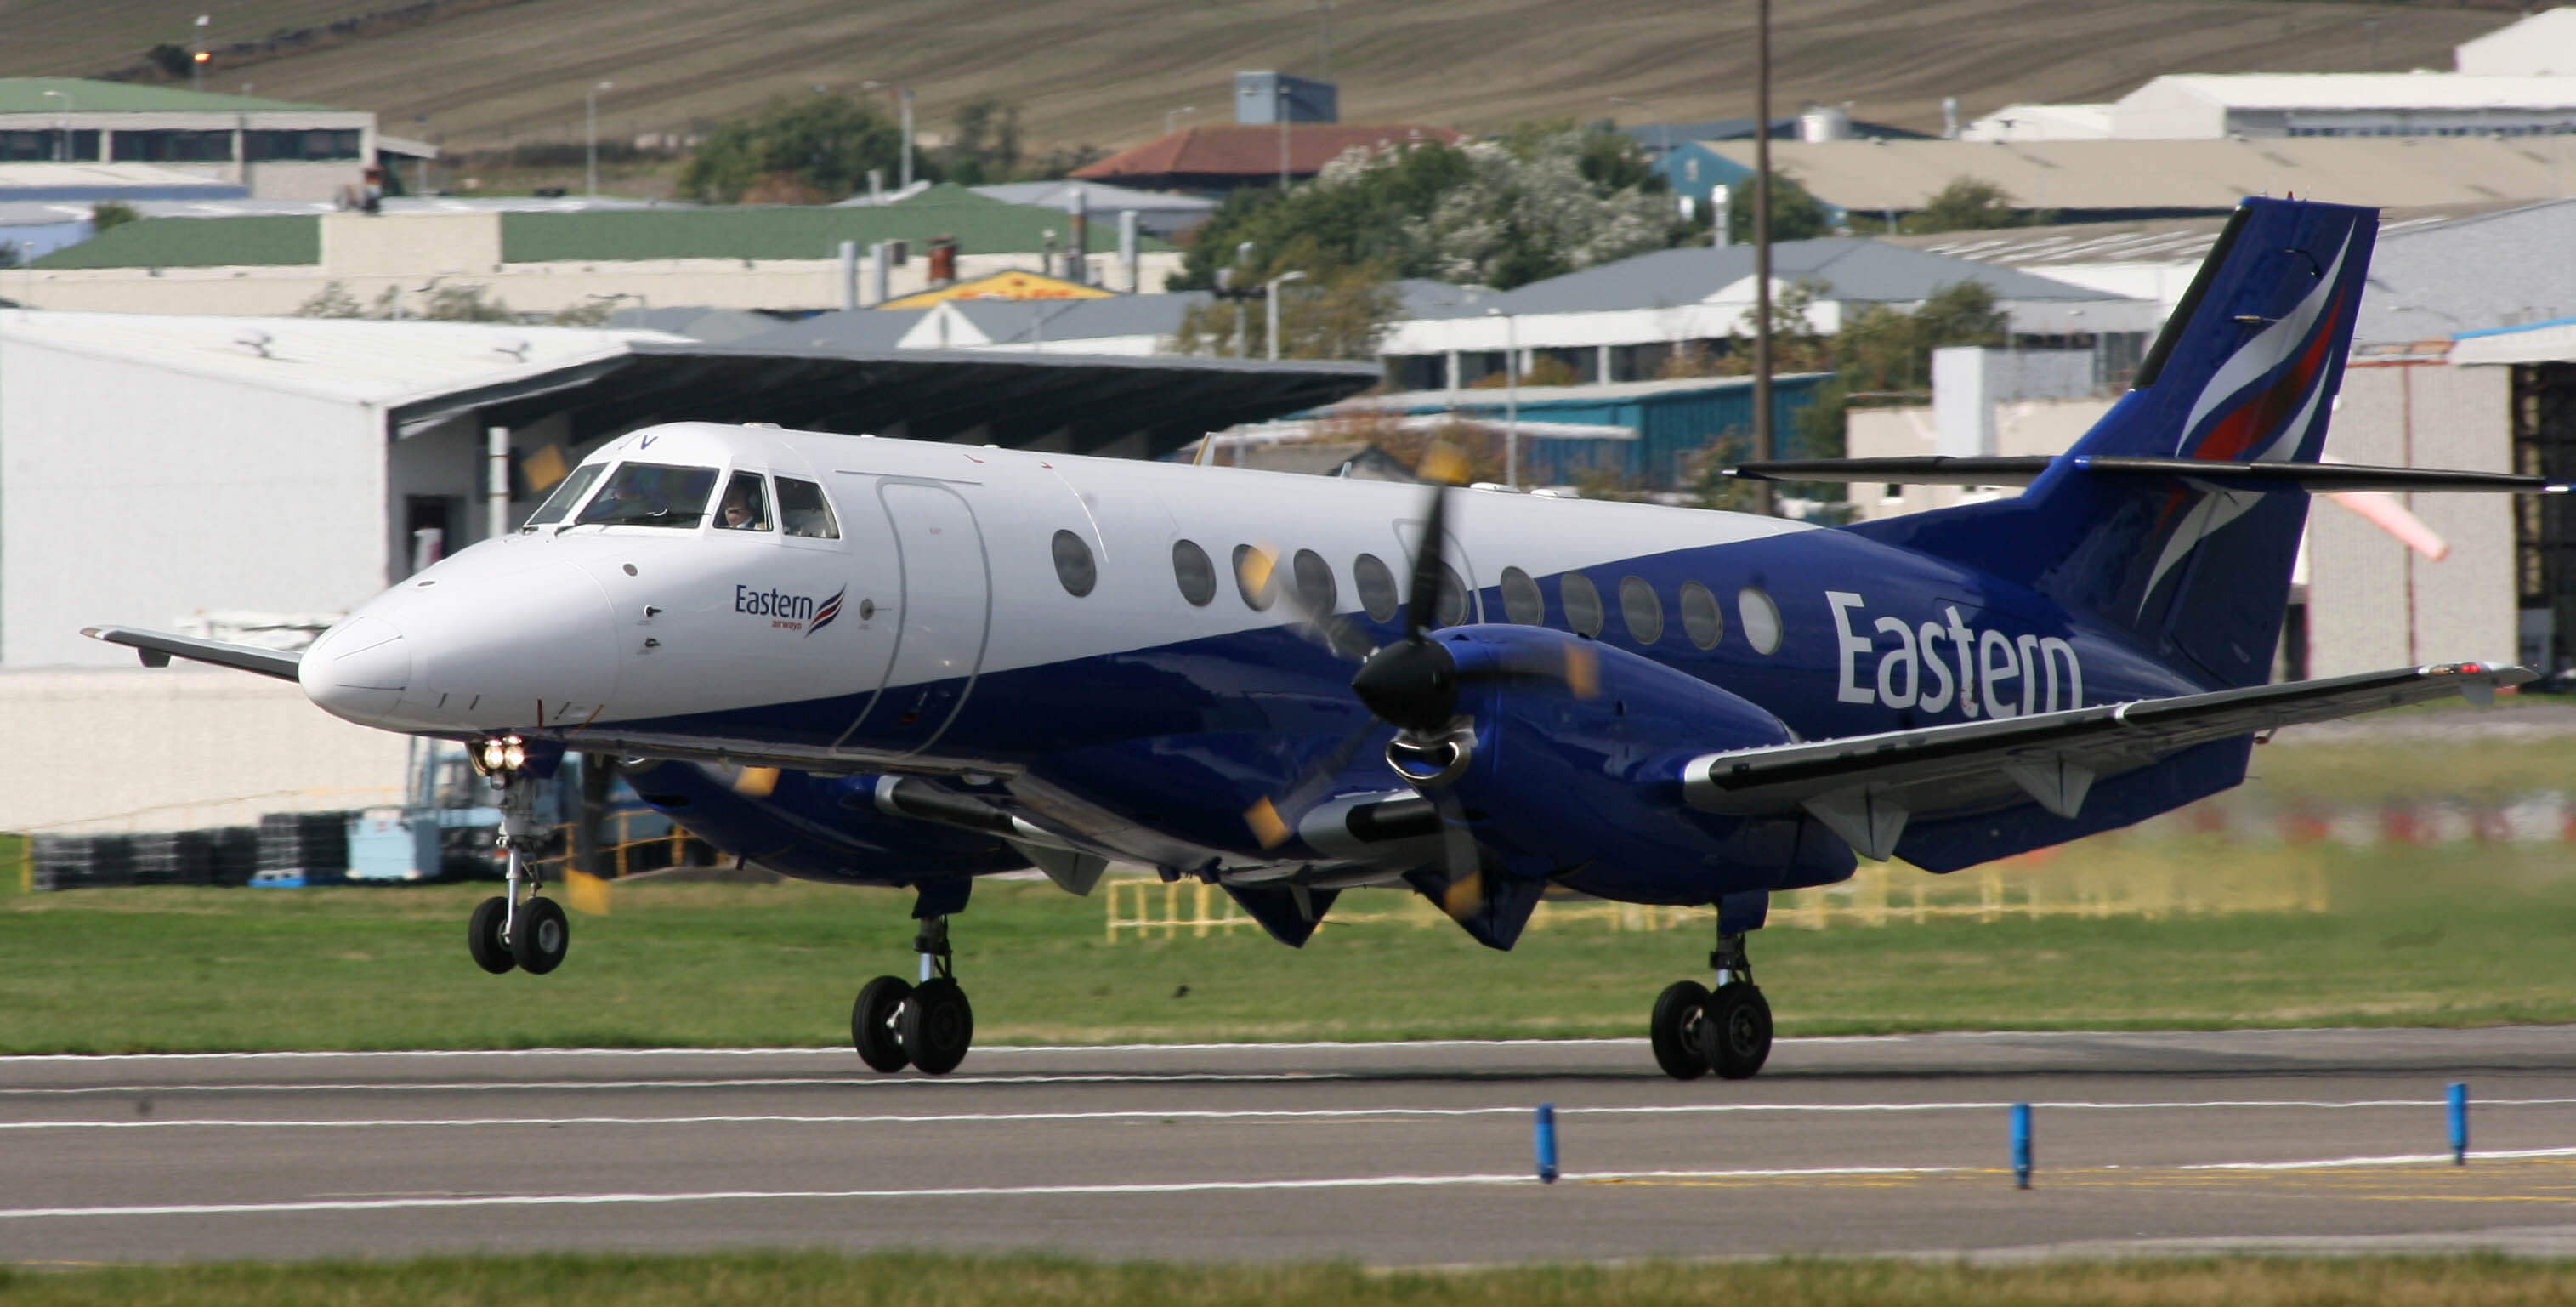 Andrew Jackson acts in acquisition of Eastern Airways Limited